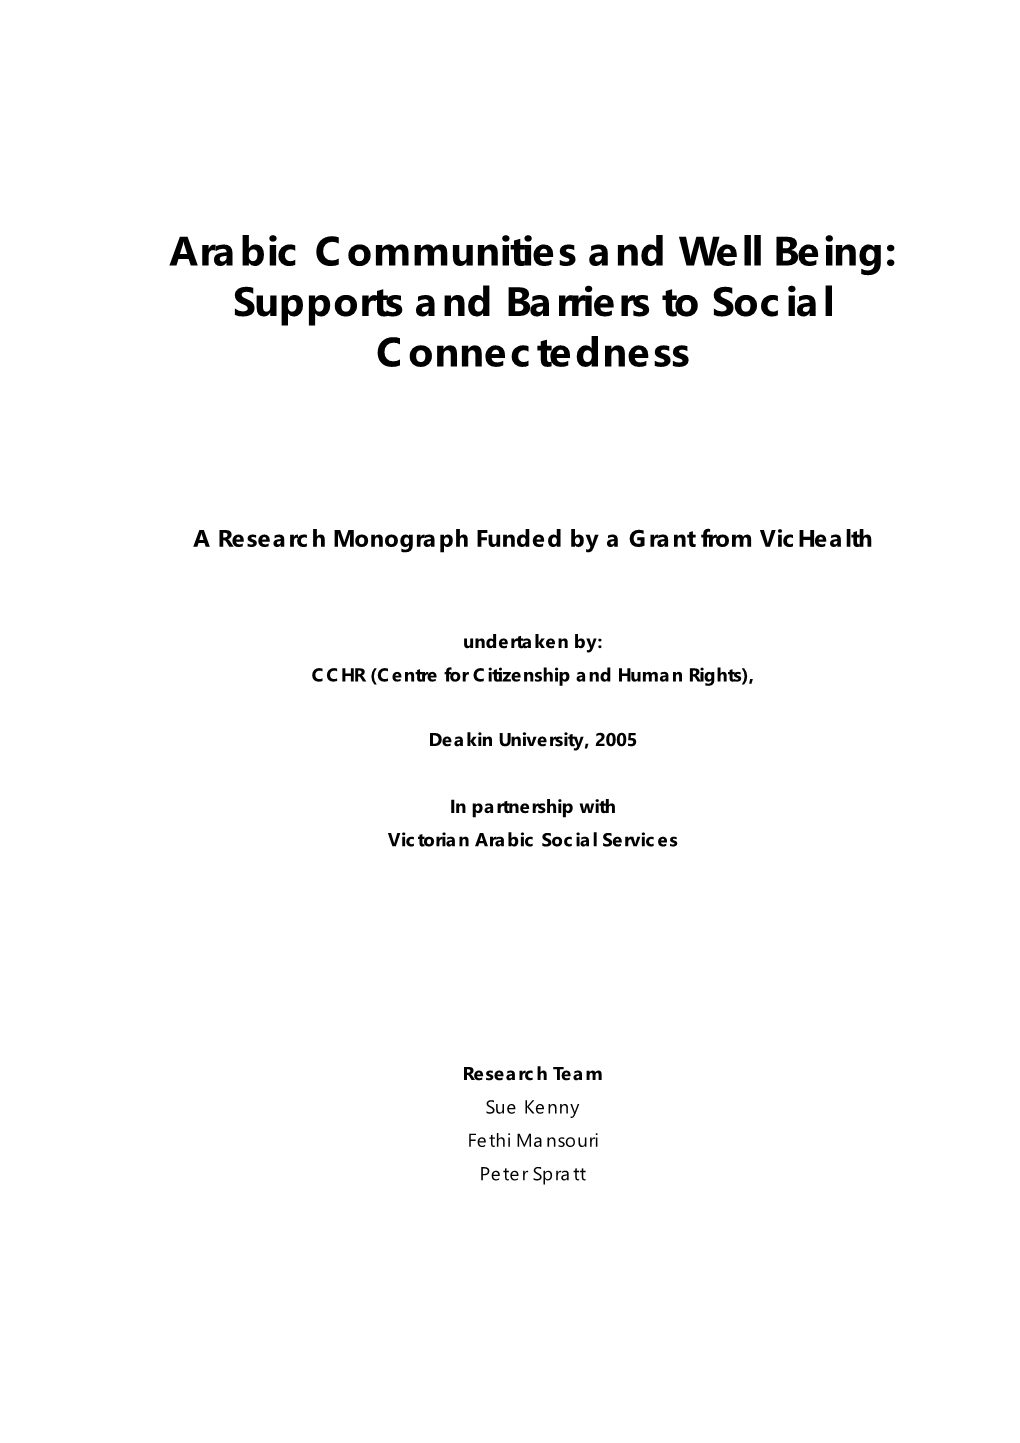 Arabic Communities and Well Being: Supports and Barriers to Social Connectedness